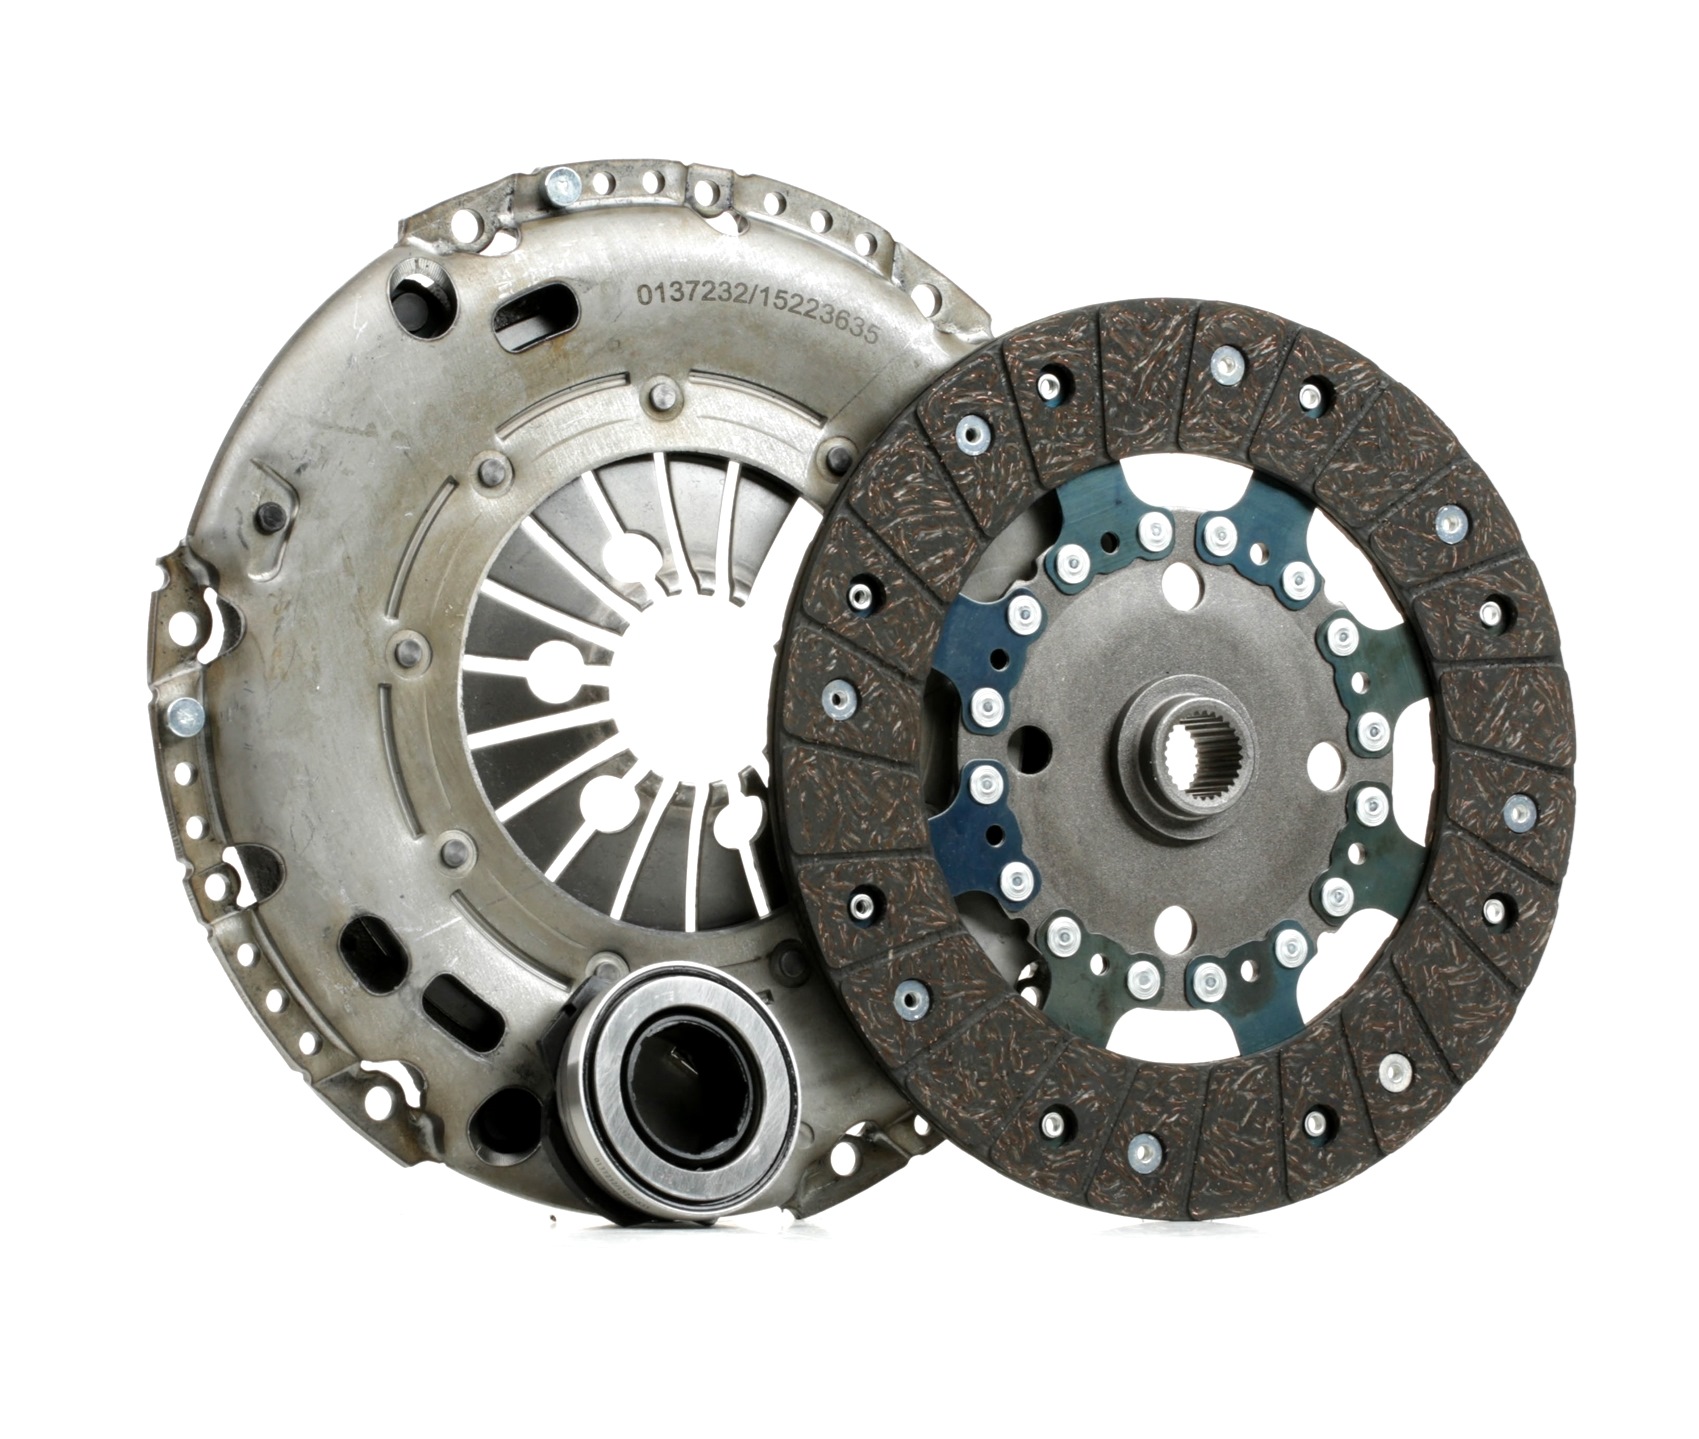 SKCK-0100432 STARK Clutch set MINI for engines with dual-mass flywheel, with clutch release bearing, with clutch disc, Check and replace dual-mass flywheel if necessary., 230mm